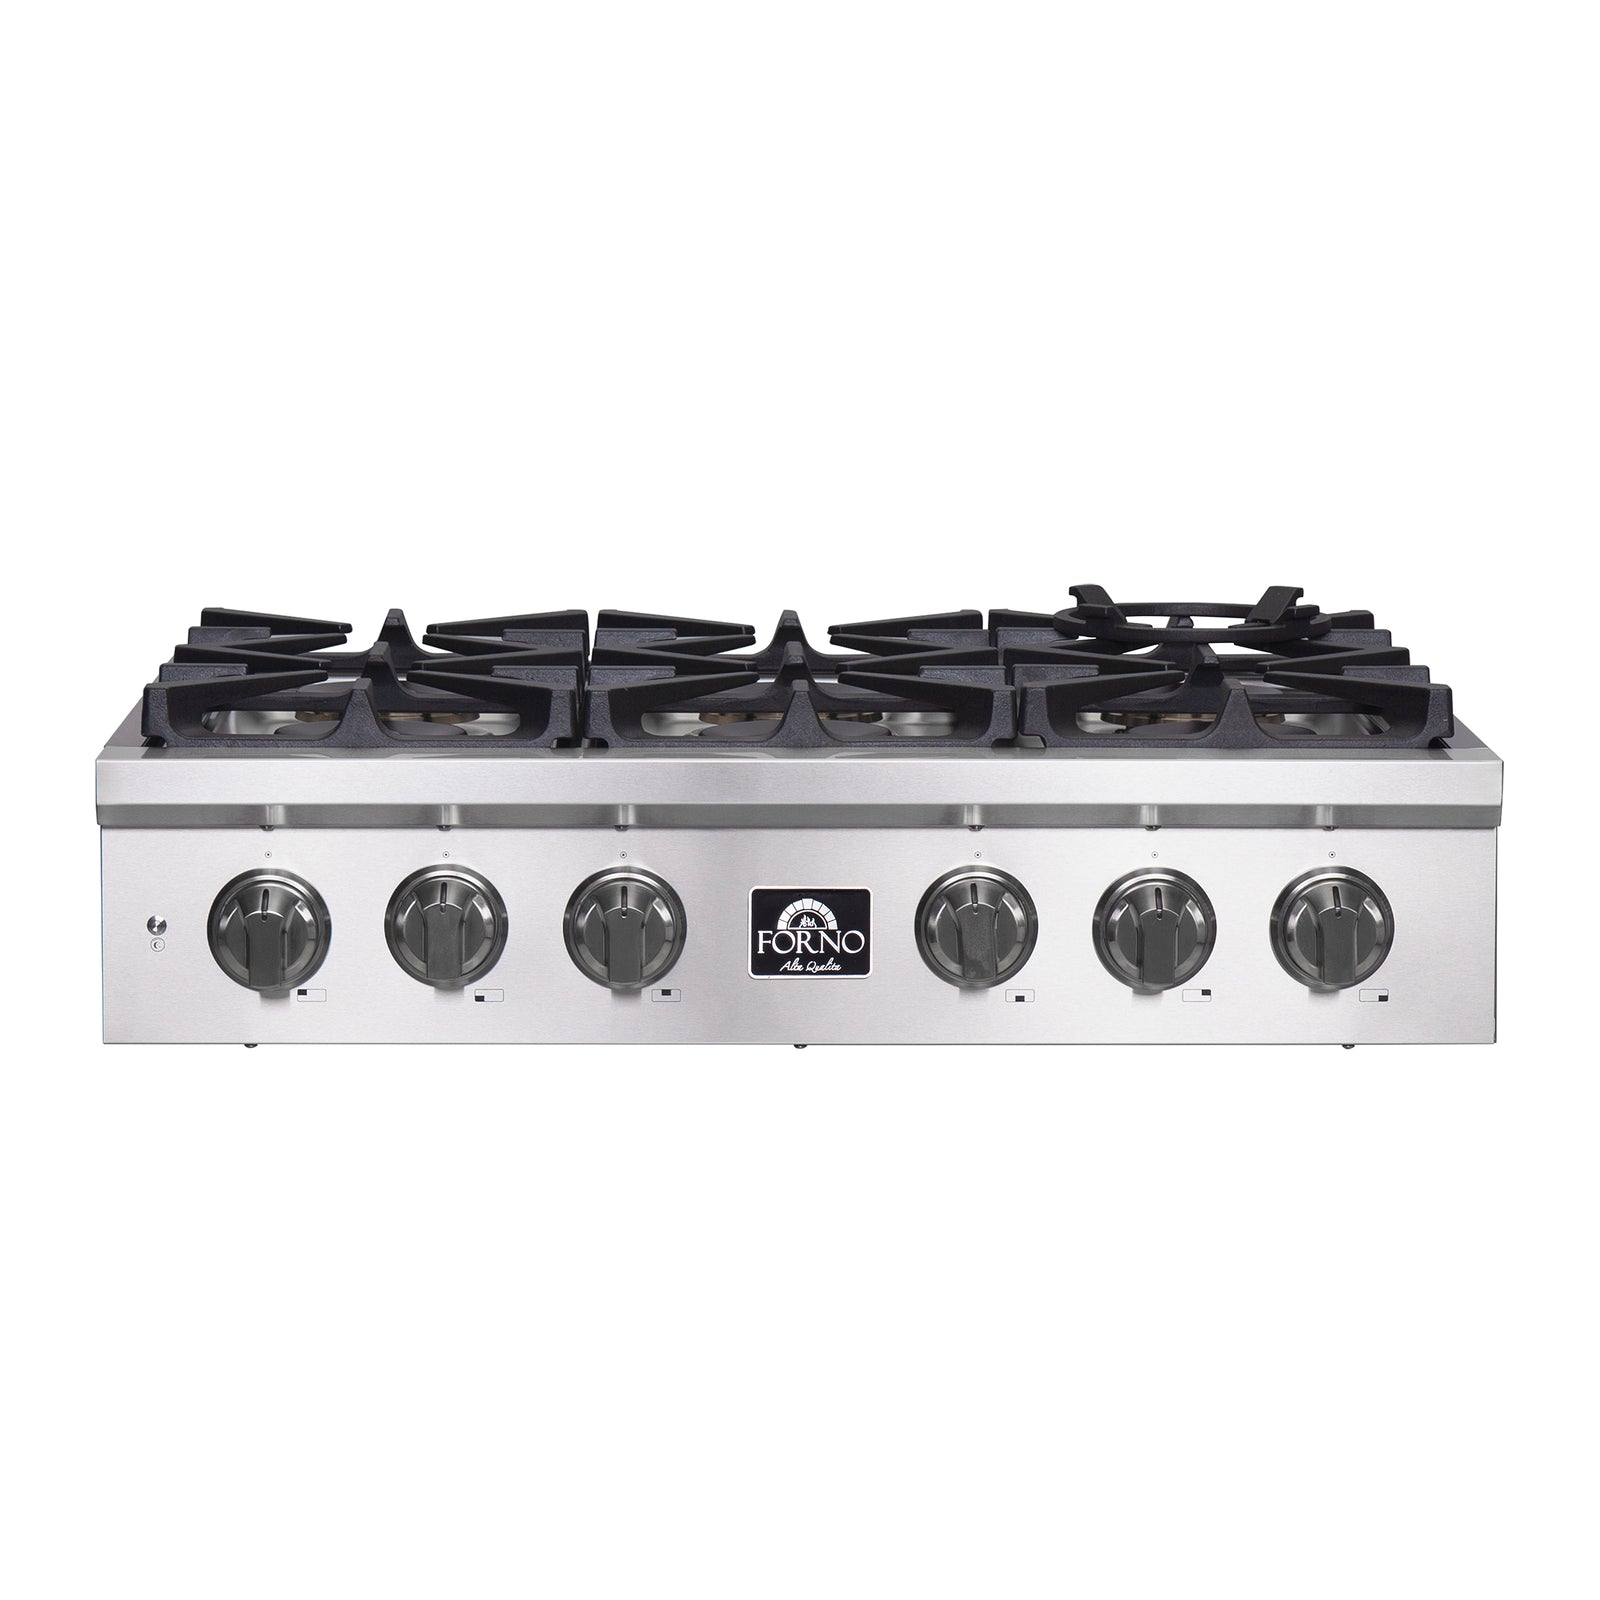 FORNO - Spezia 36-Inch Gas Rangetop, 6 Burners. Wok Ring and Grill/Griddle in Stainless Steel